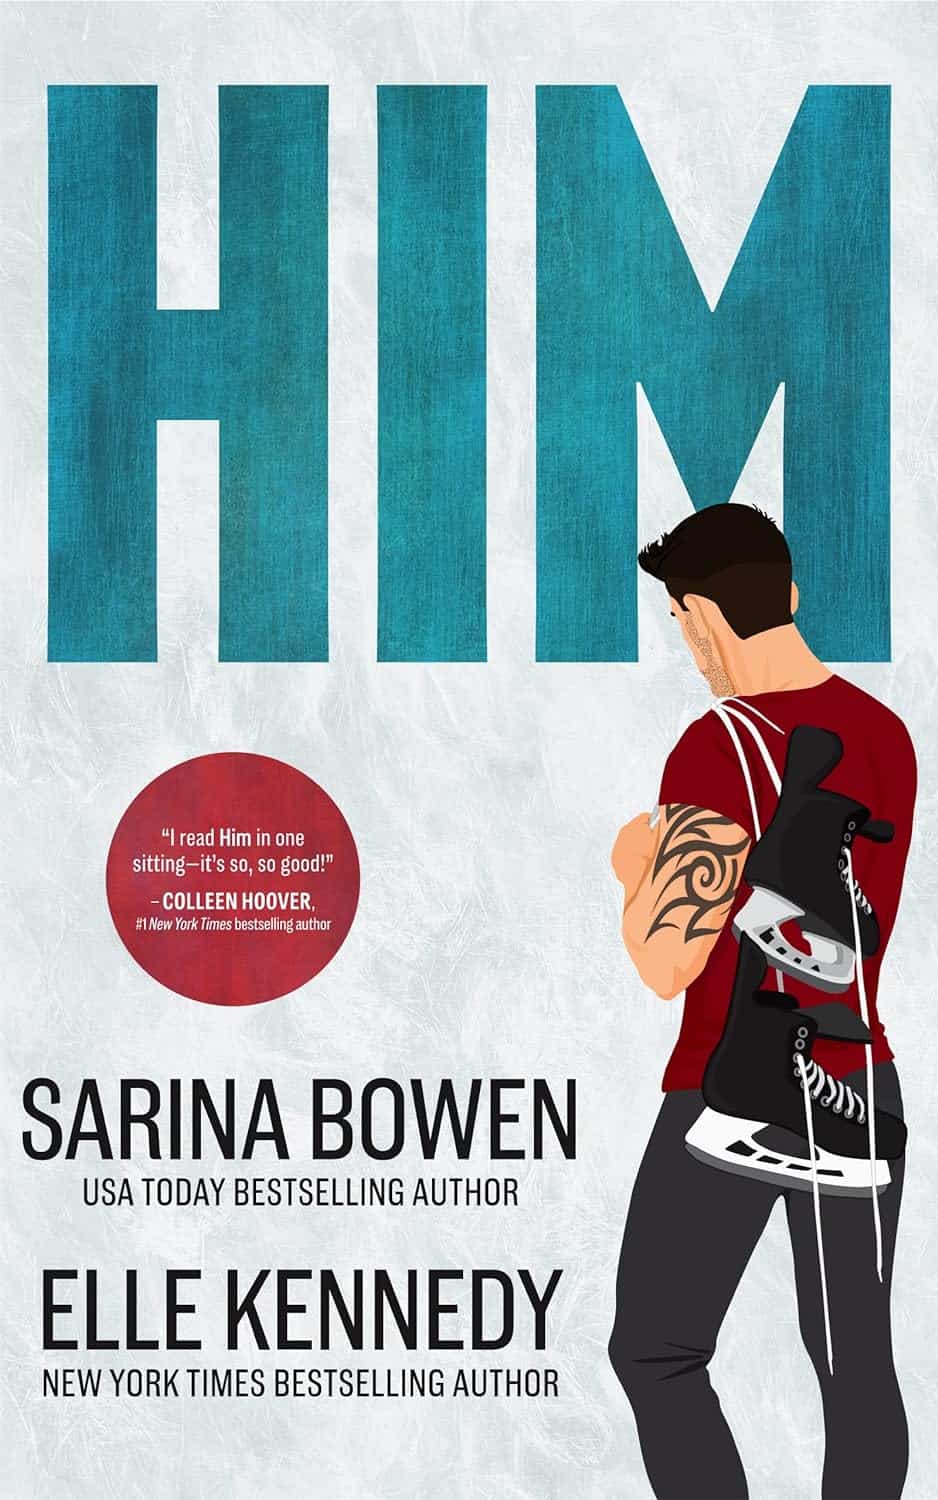 Him by Sarina Bowen and Elle Kennedy